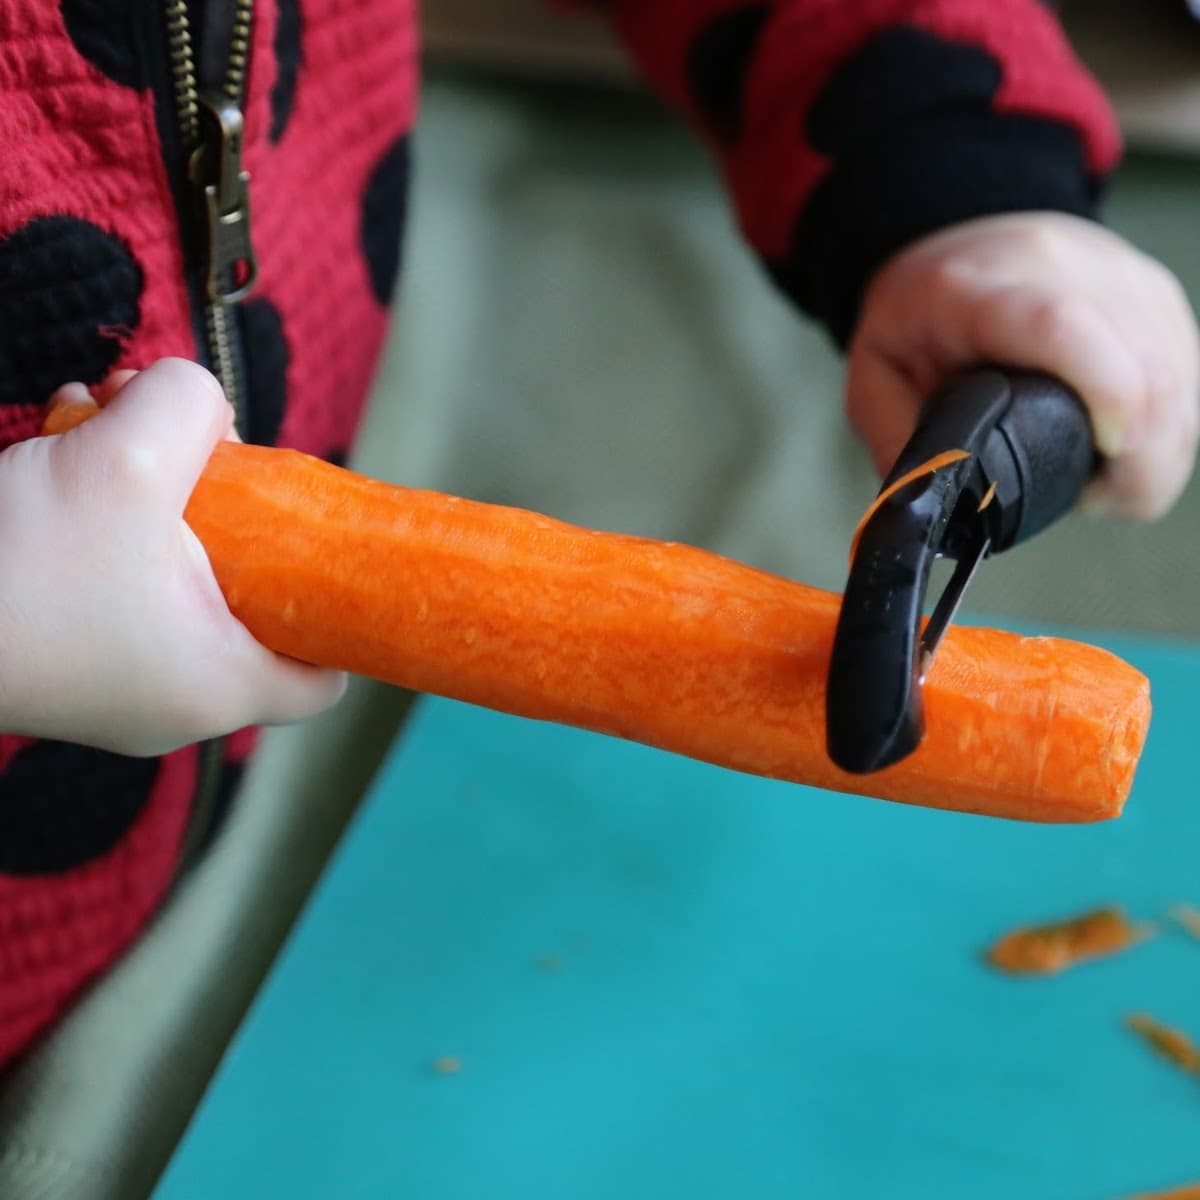 child peeling a carrot over a teal cutting board